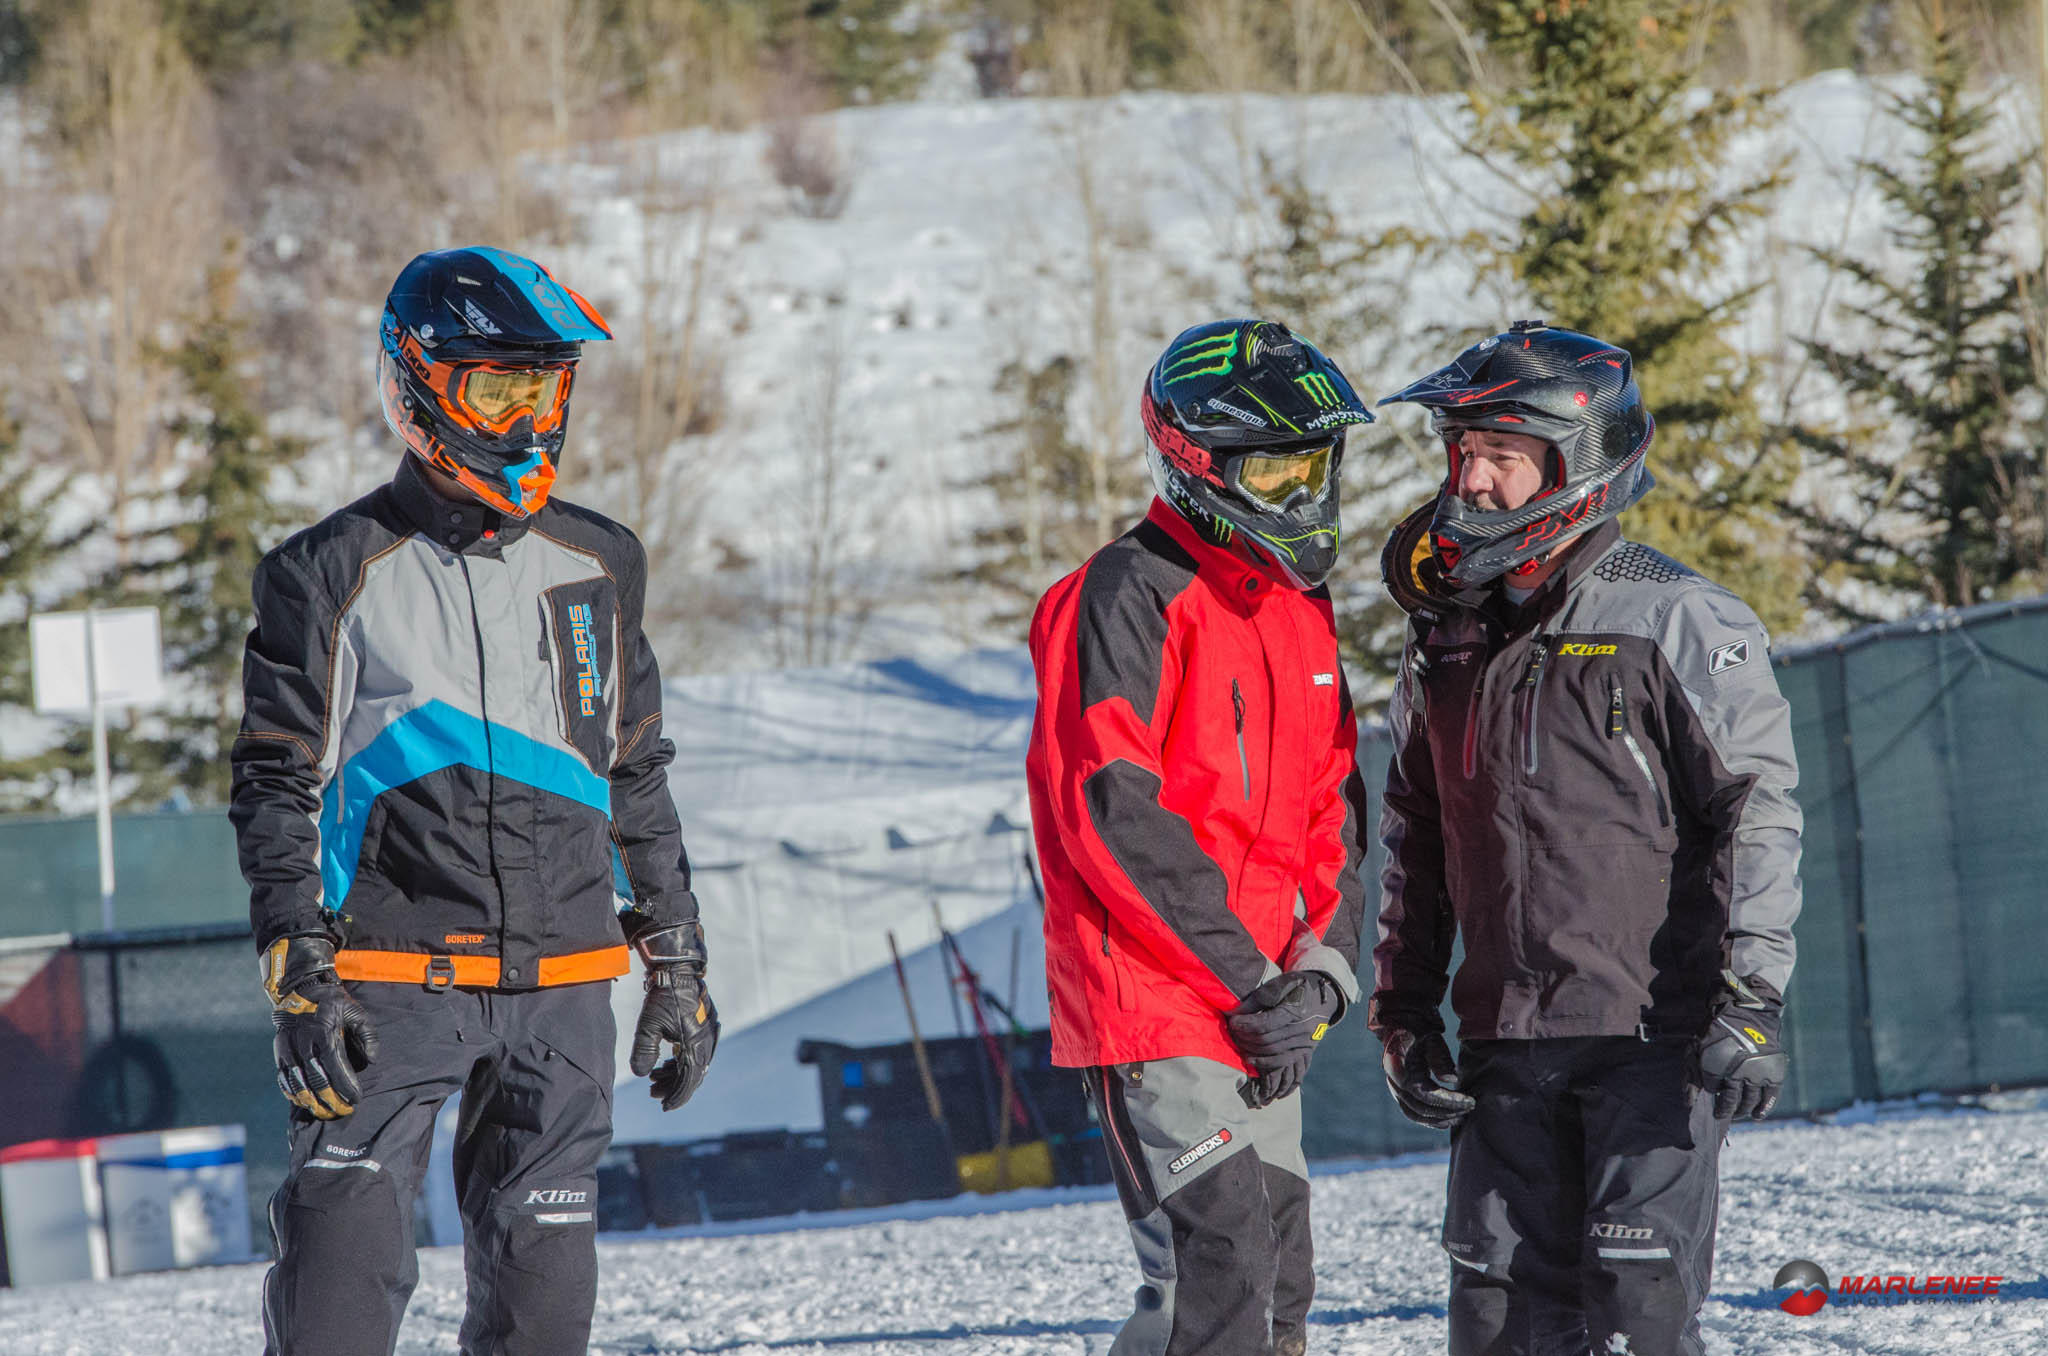 Erik Woog and Chris Burandt Discuss Strategy while Keith Curtis devises his own plan at X-Games 2015